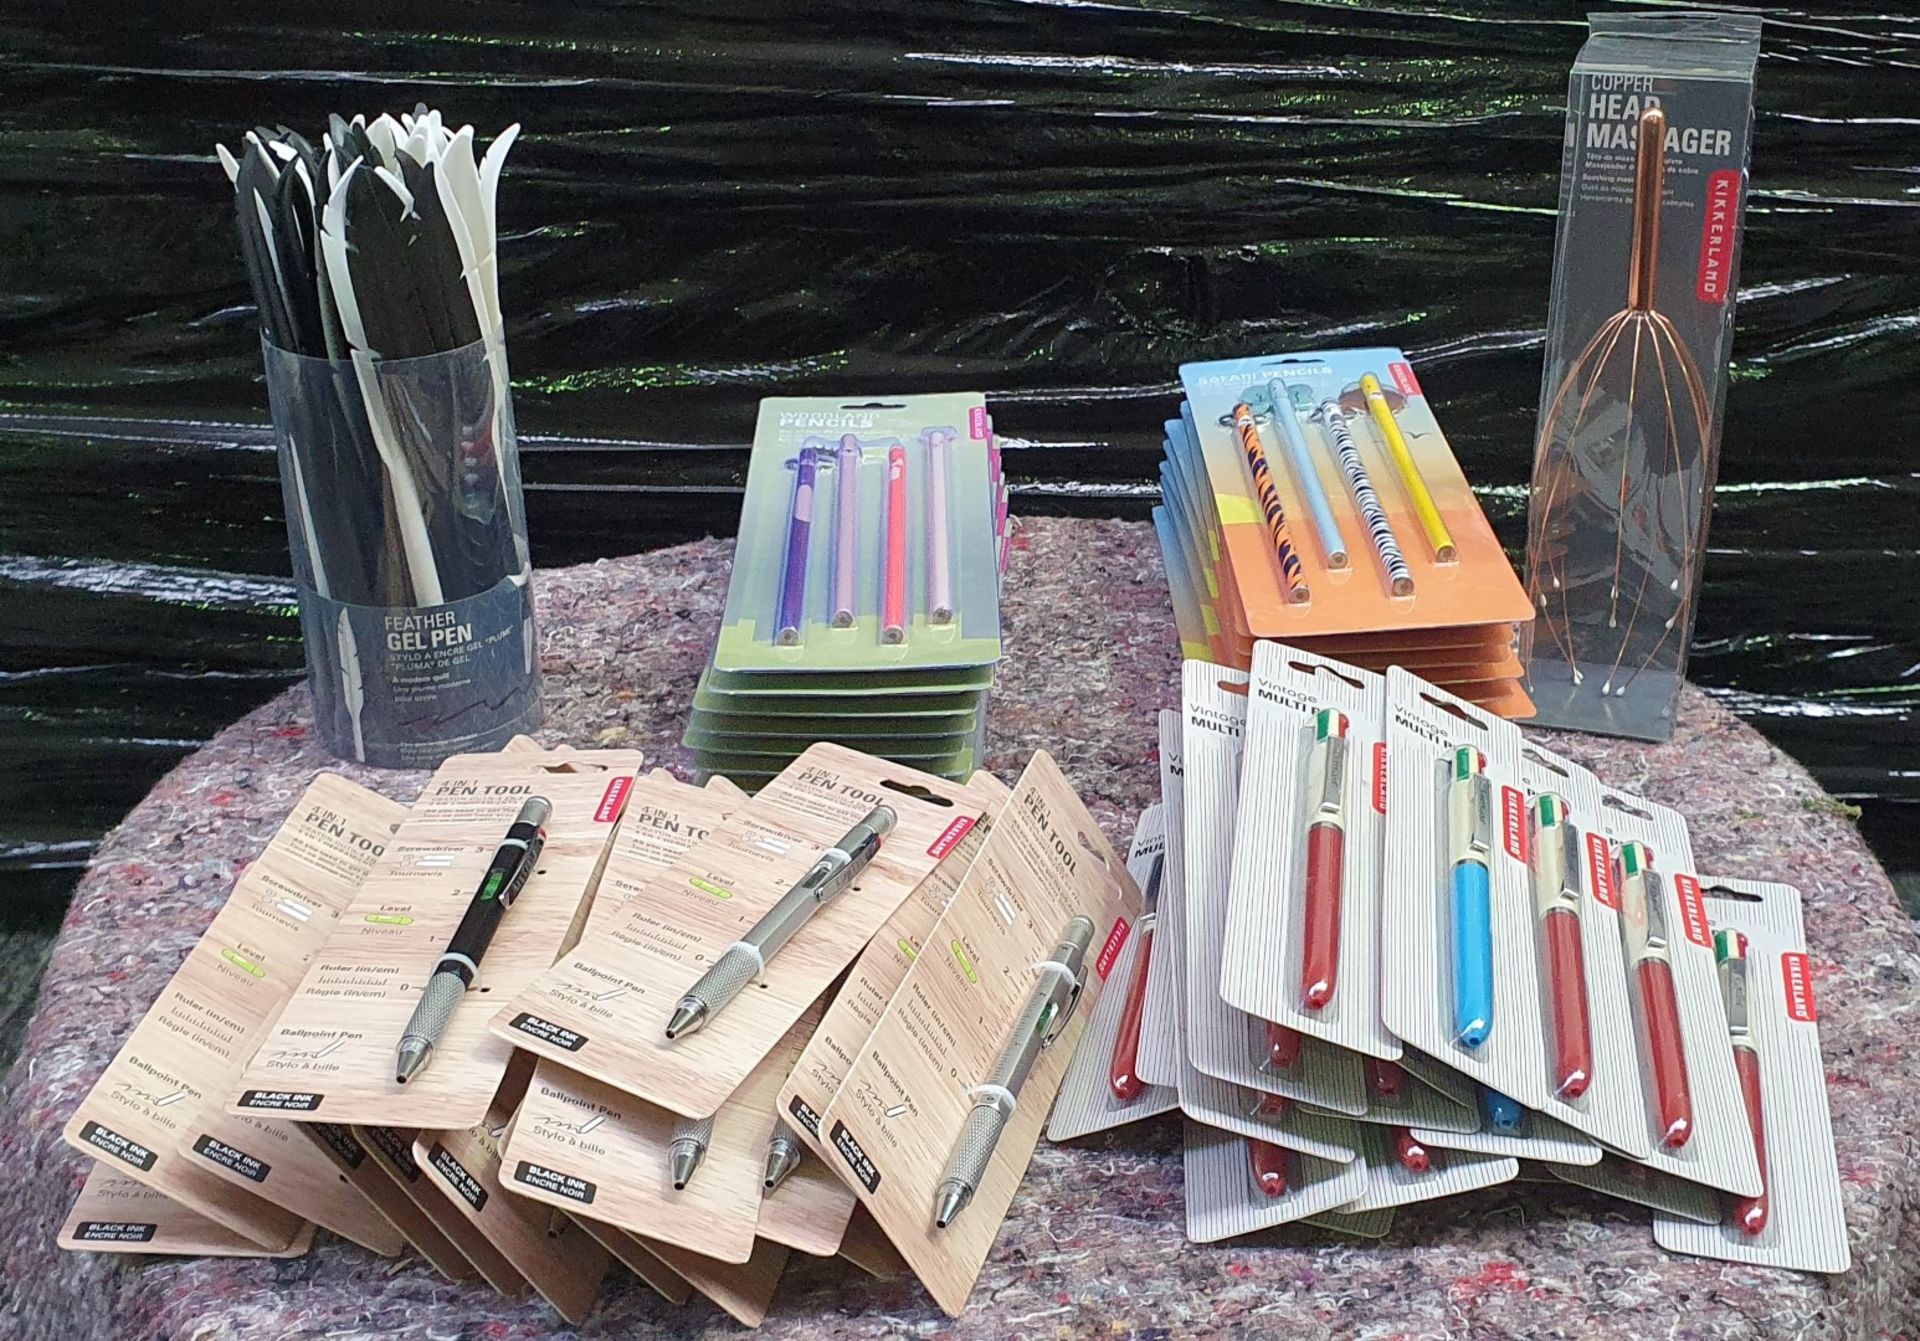 96 x Assorted Kikkerland Stationary Items Including 4 in 1 Pens, Feather Pens, Woodland Pencil Sets,